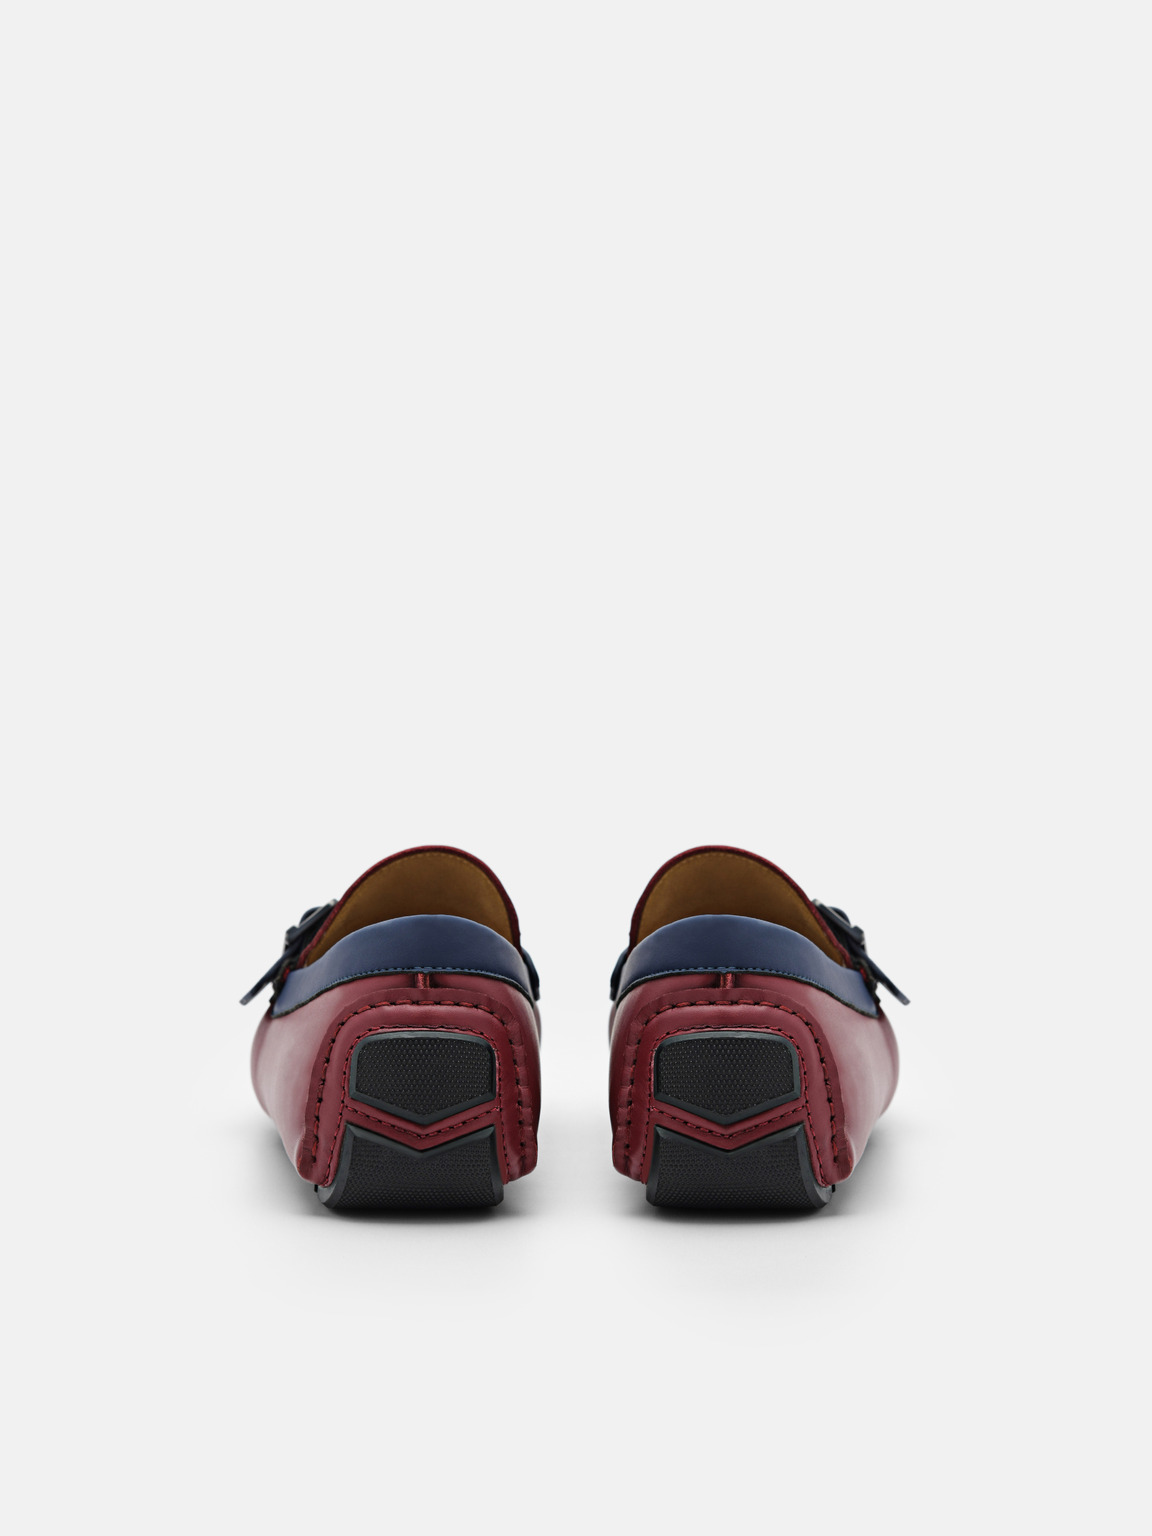 Ripley Leather Driving Shoes, Maroon